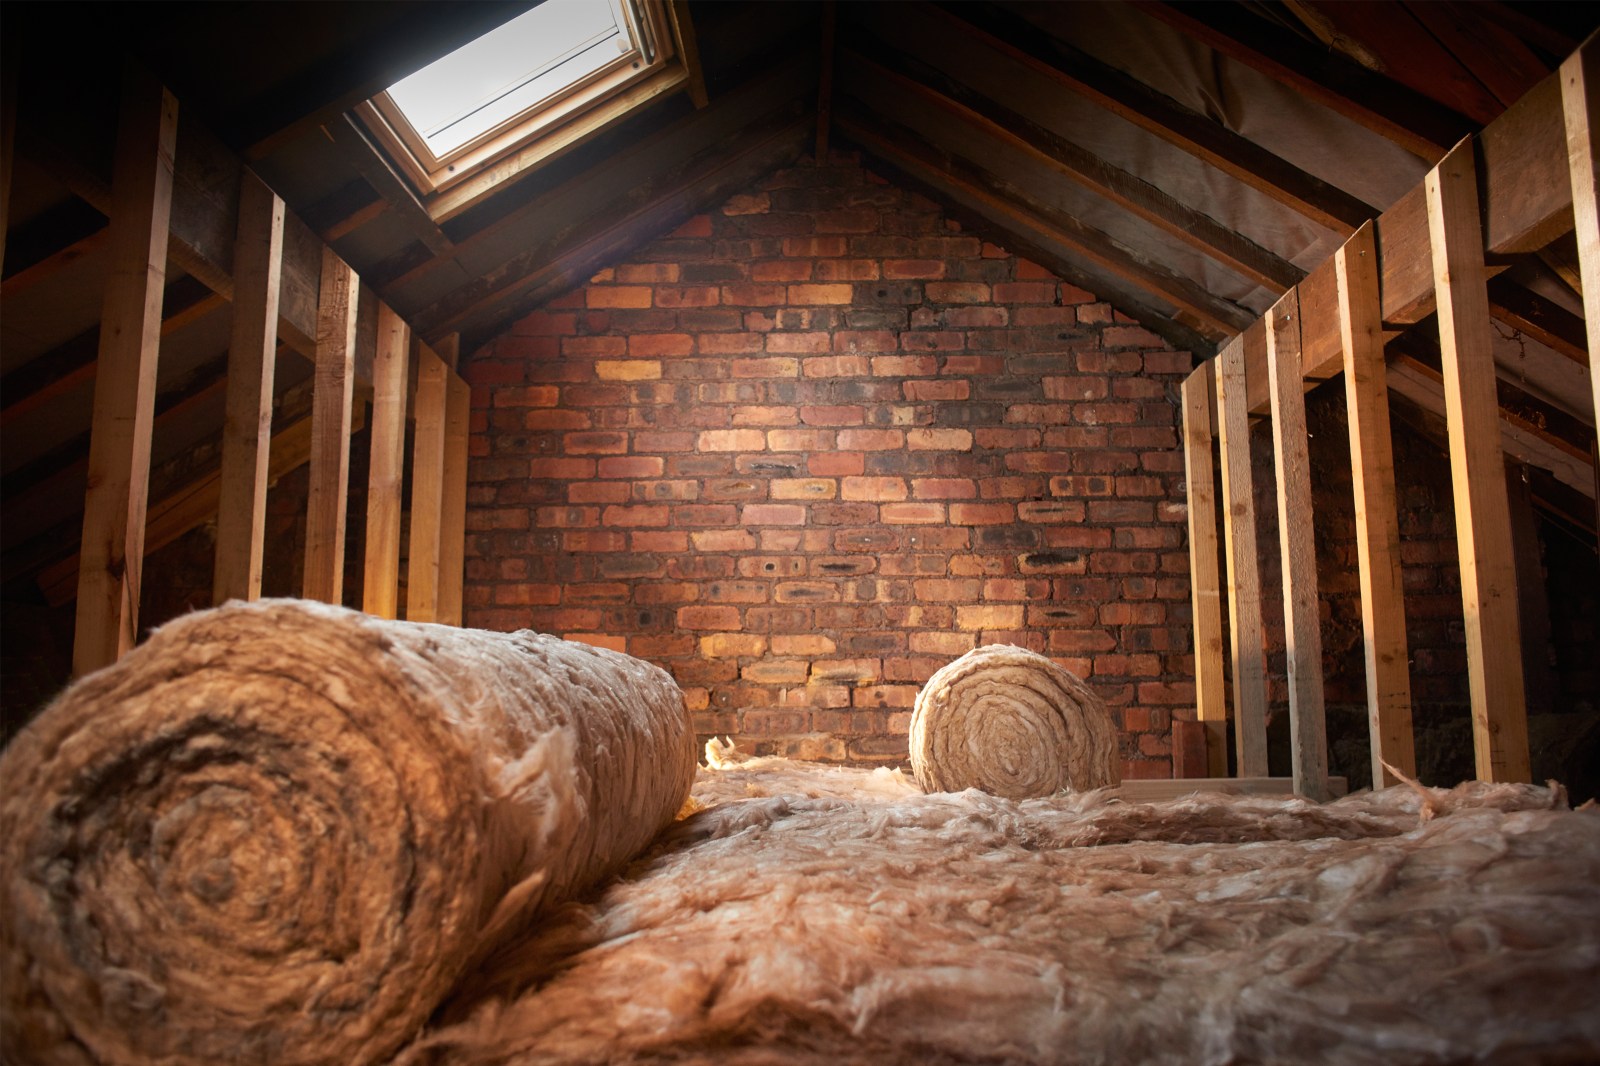 cypress insulation company insulation removal service